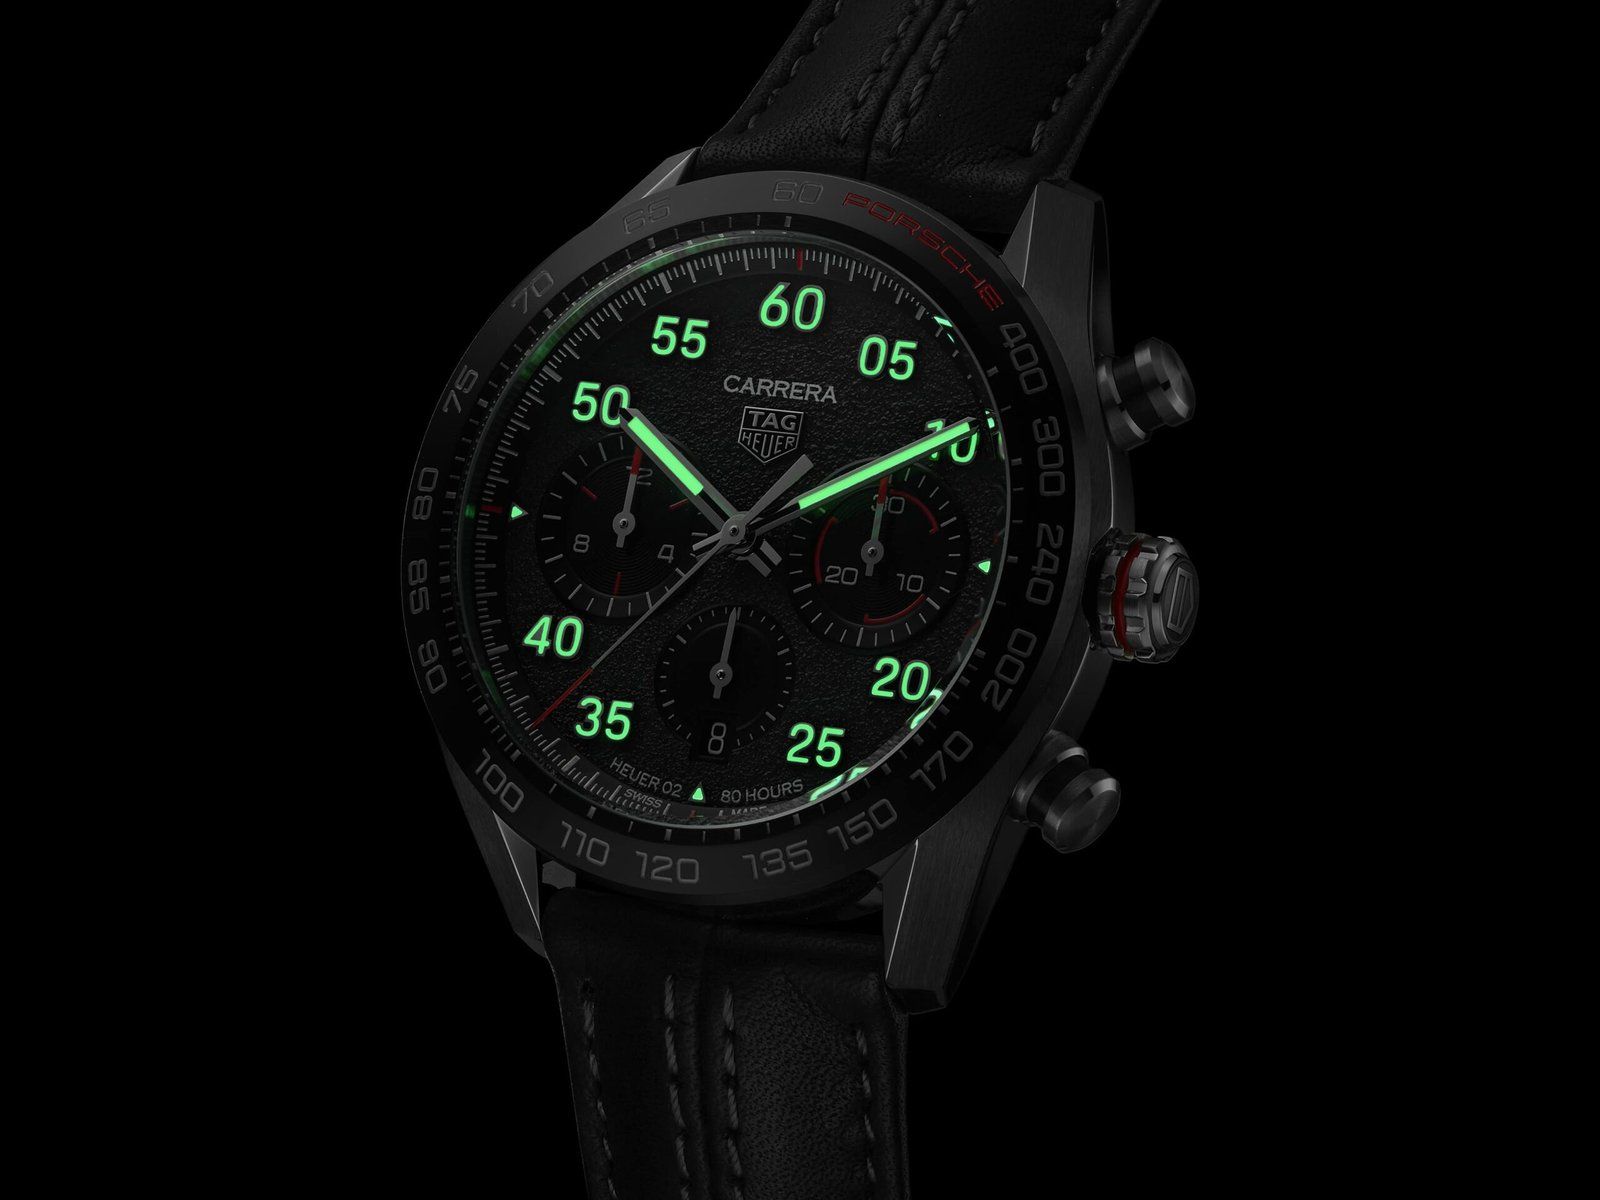 FEATURED: TAG Heuer Carrera Porsche Chronograph – Special Edition